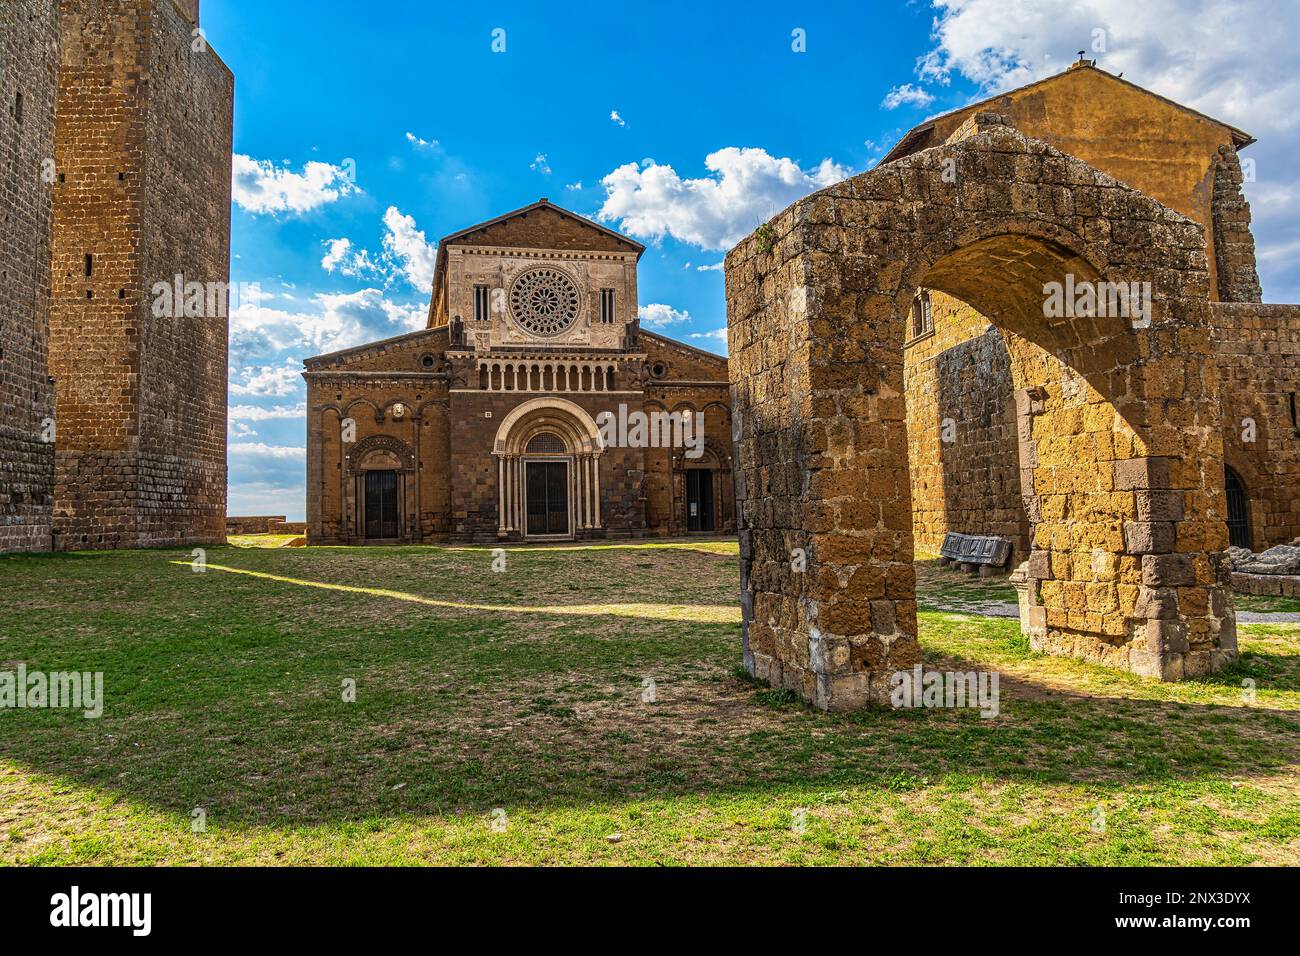 The Romanesque facade of the Basilica of San Pietro in Tuscania with the three defense towers and the ancient entrance arch. Tuscania, Lazio Stock Photo